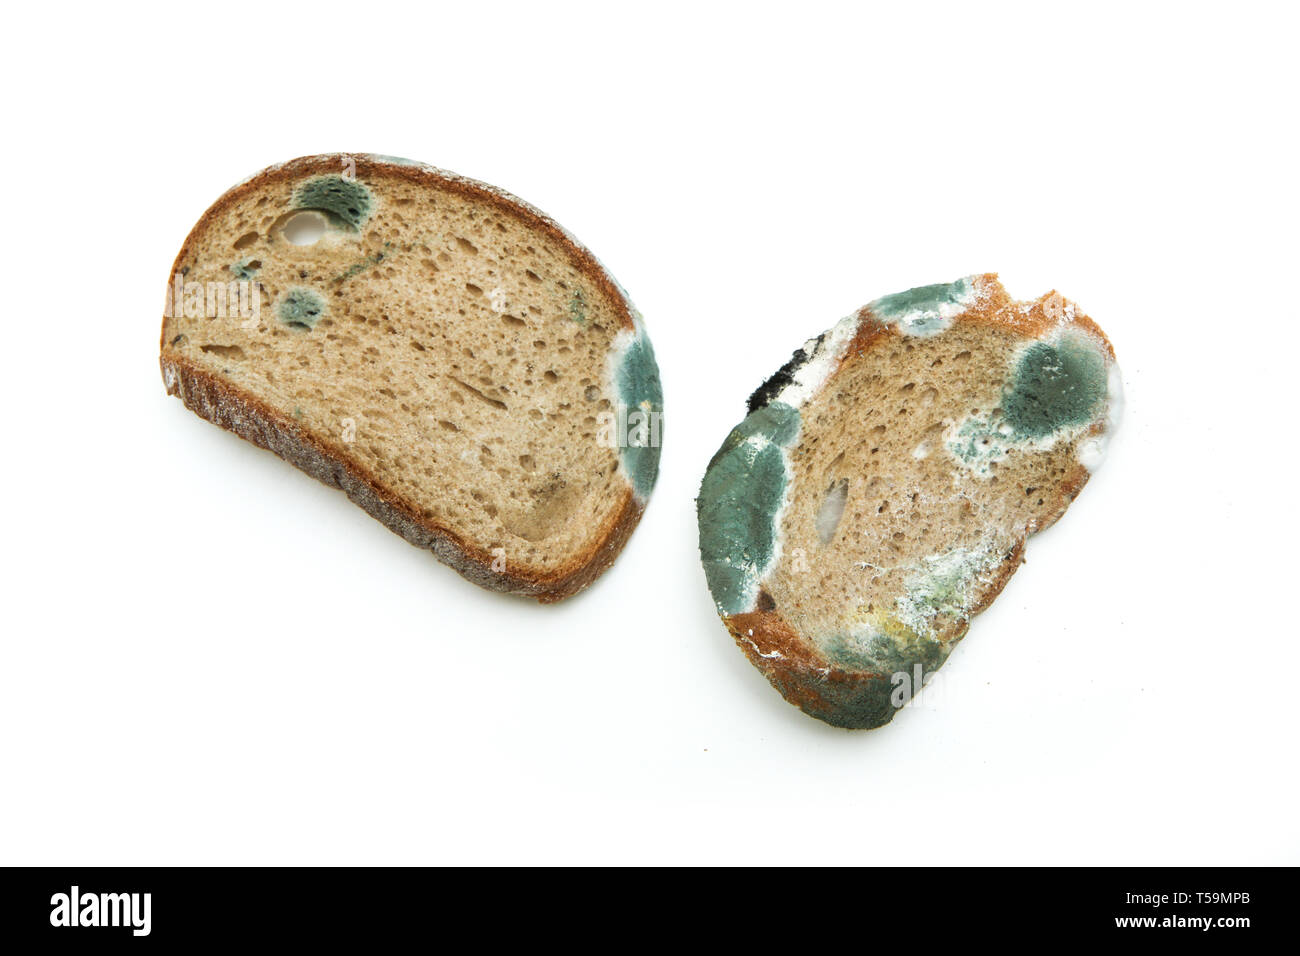 The picture of a mouldy bread. Rotten and uneatable. Isolated on white background. Stock Photo